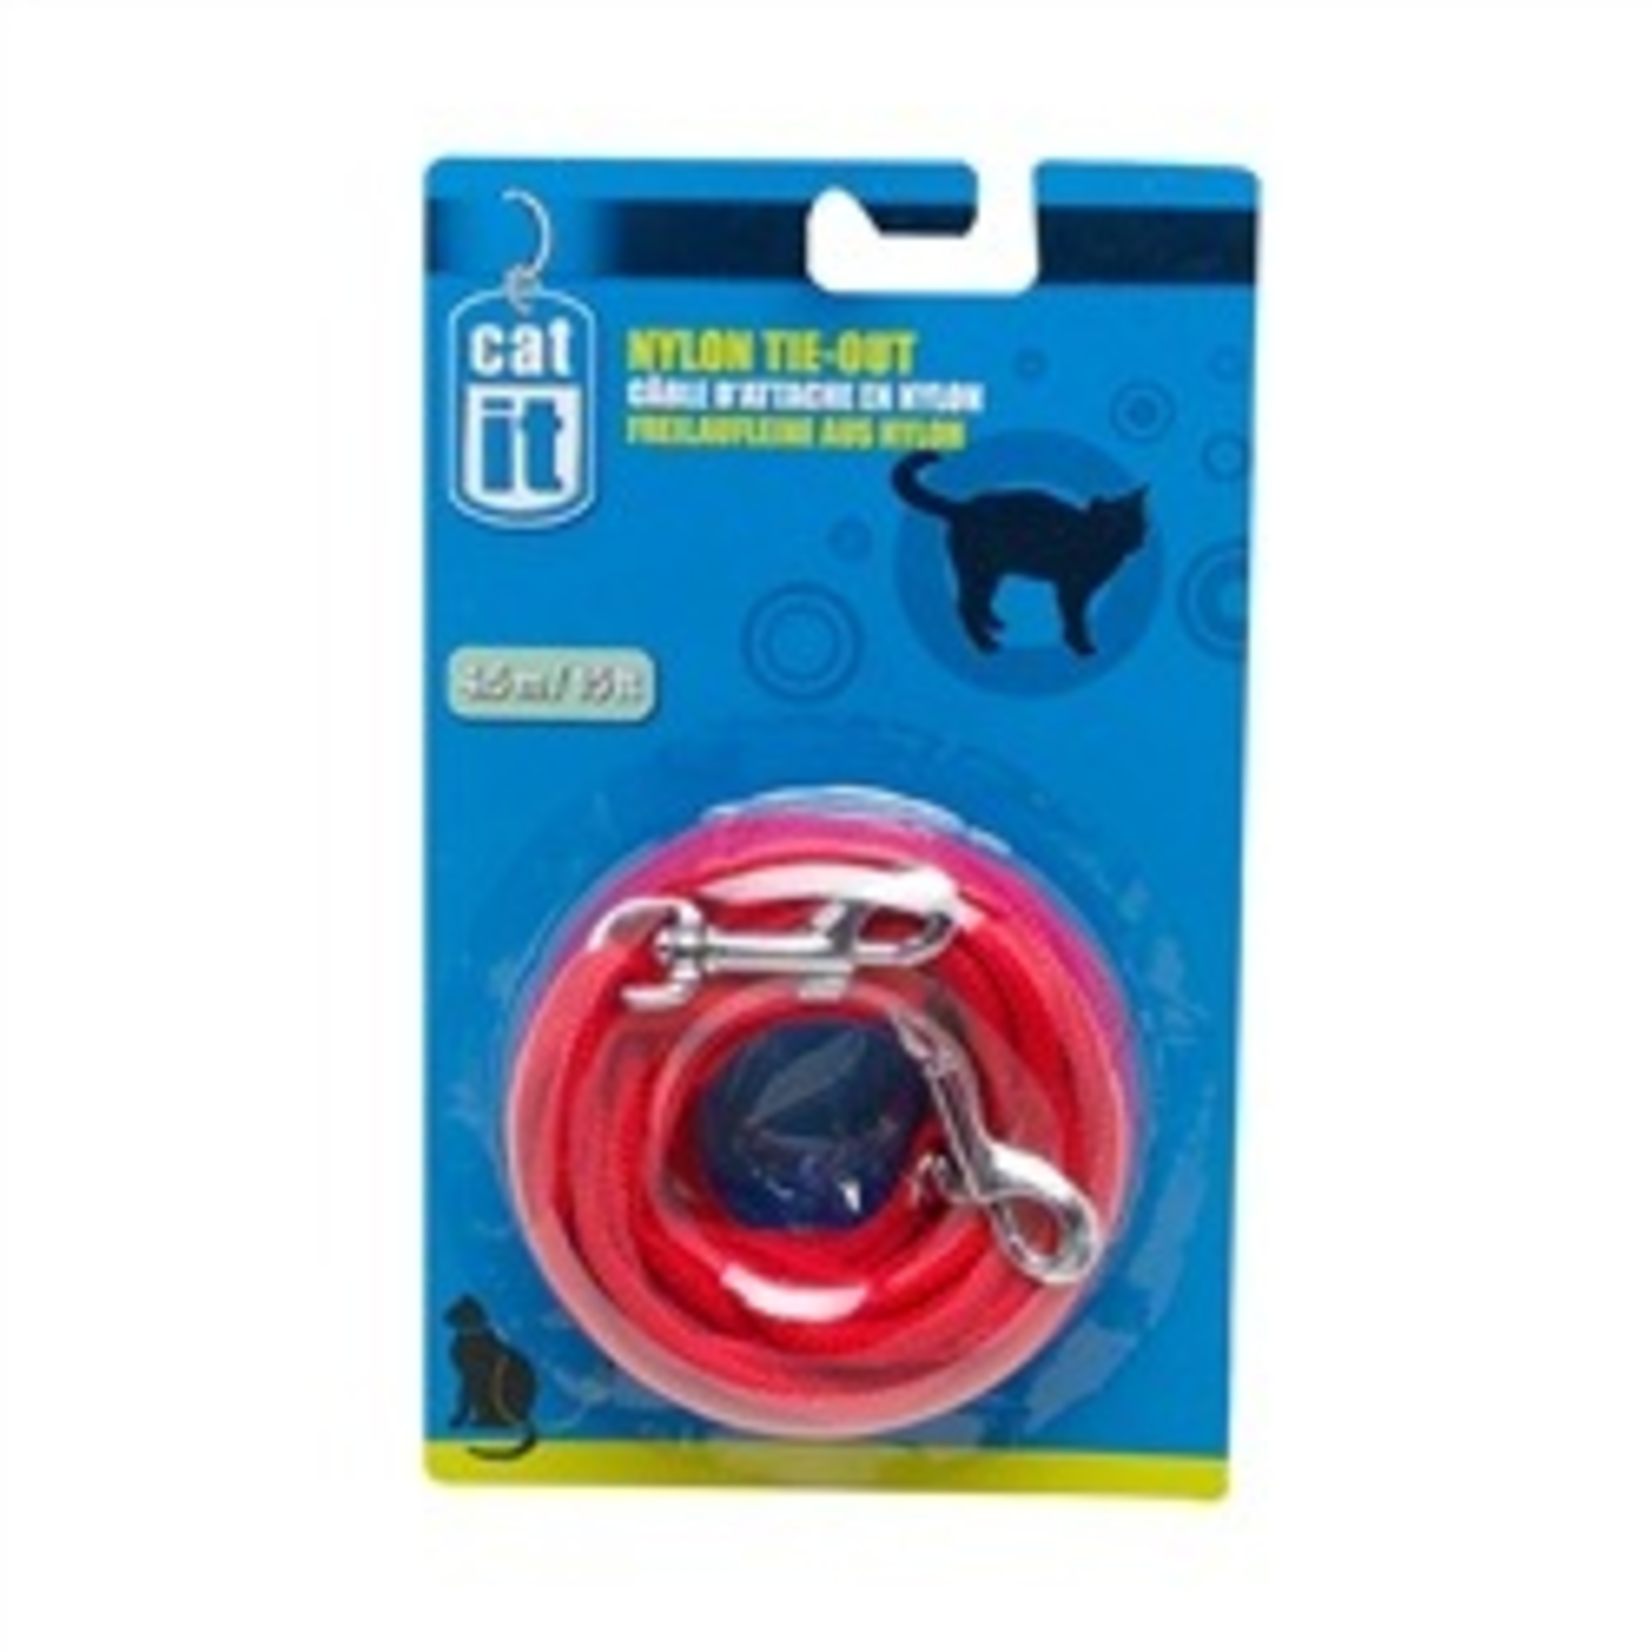 CAT IT (W) CA Nyl. Tie-out, 3m (10 ft), Red